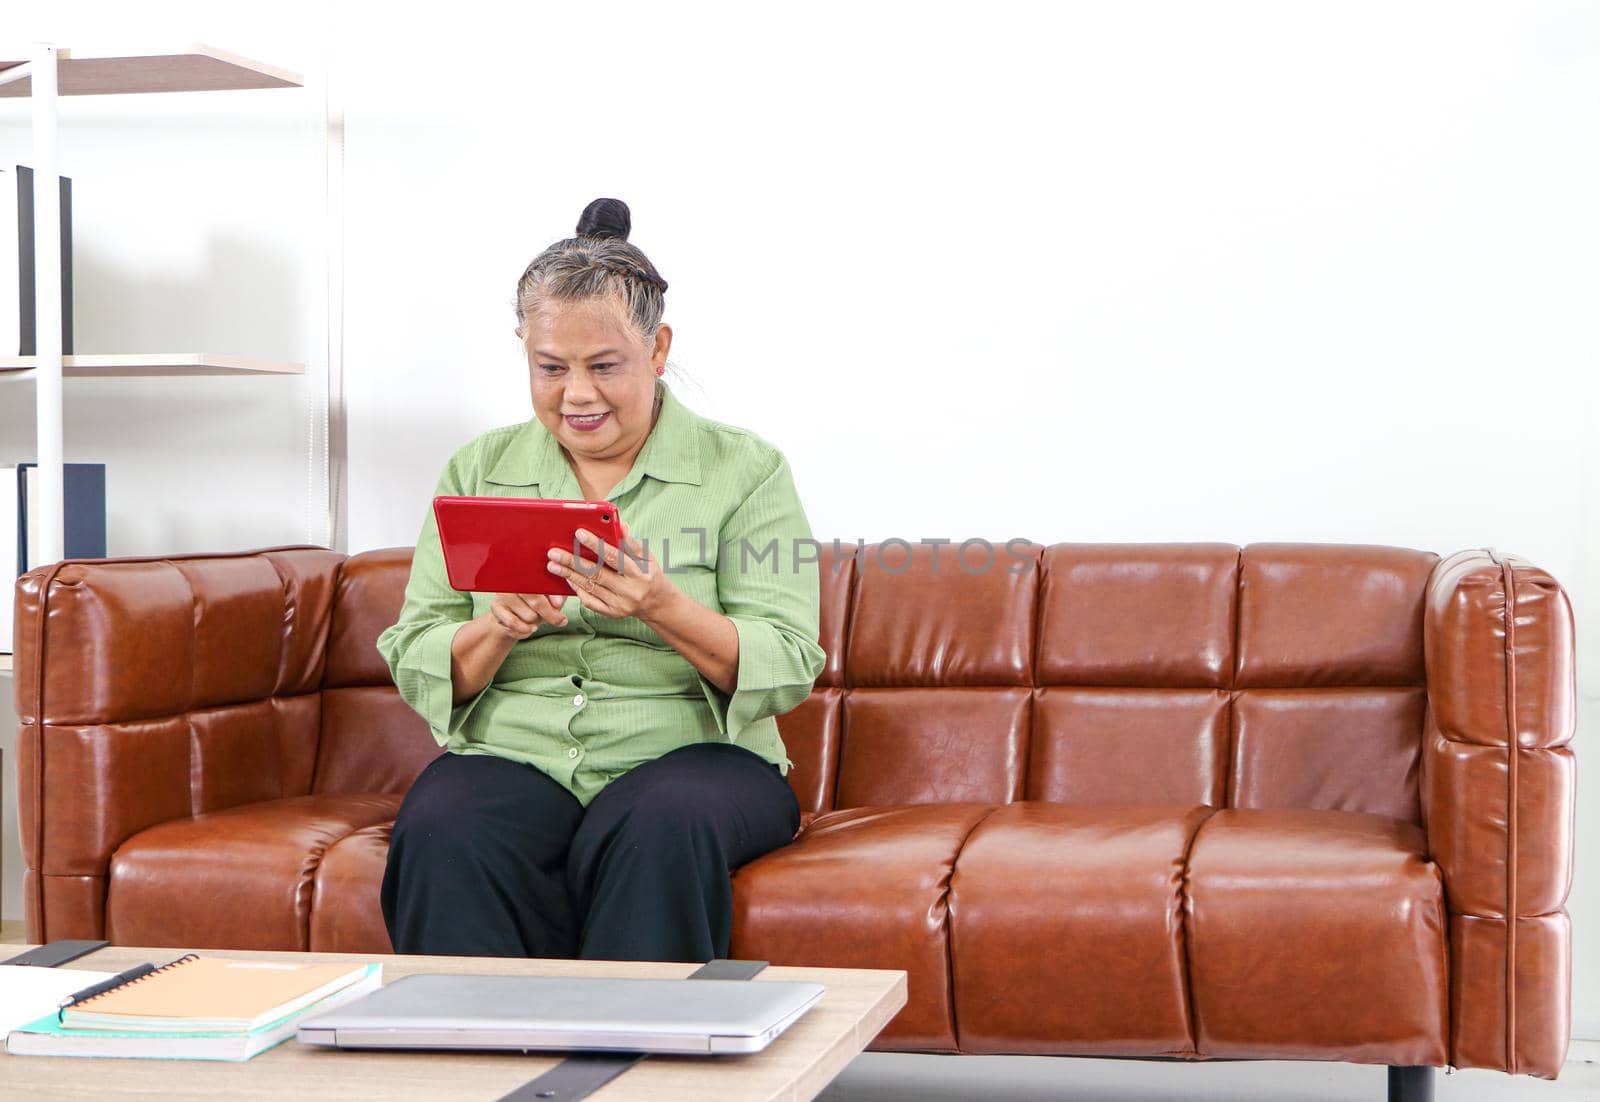 Asian women Retirement Use a smartphone in the living room  by atitaph